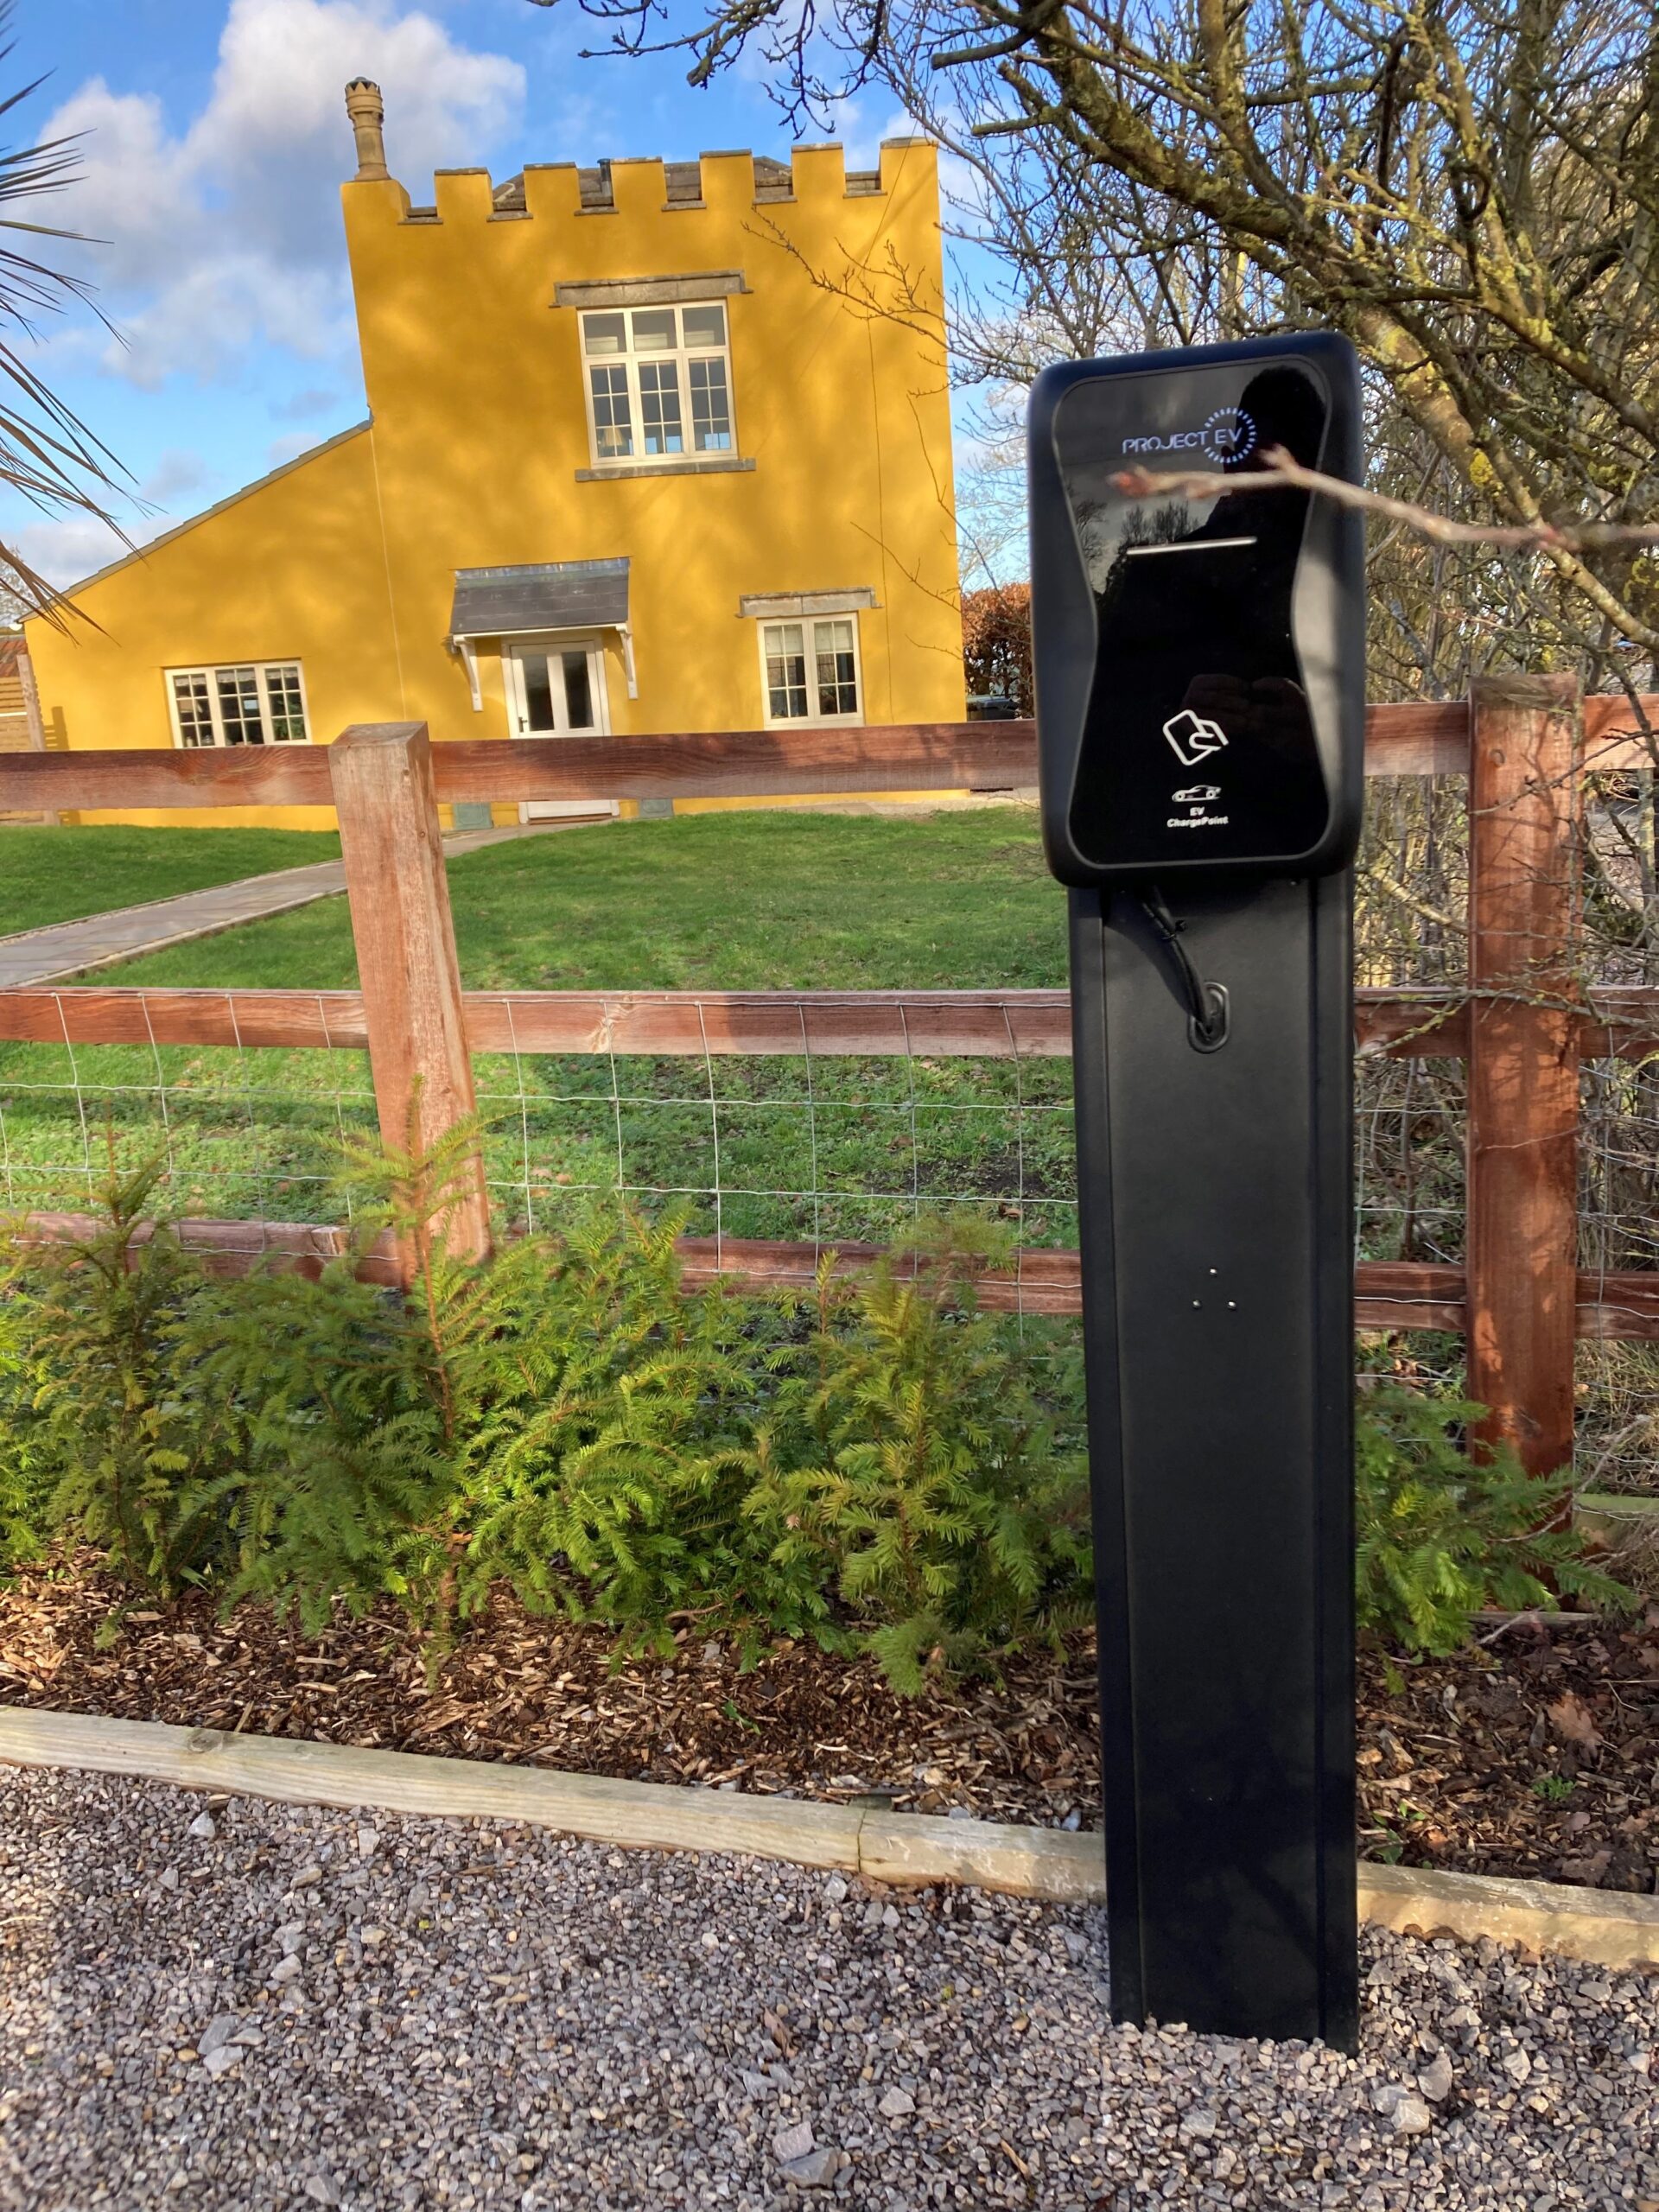 Our latest EV installation is in a beautiful rural location